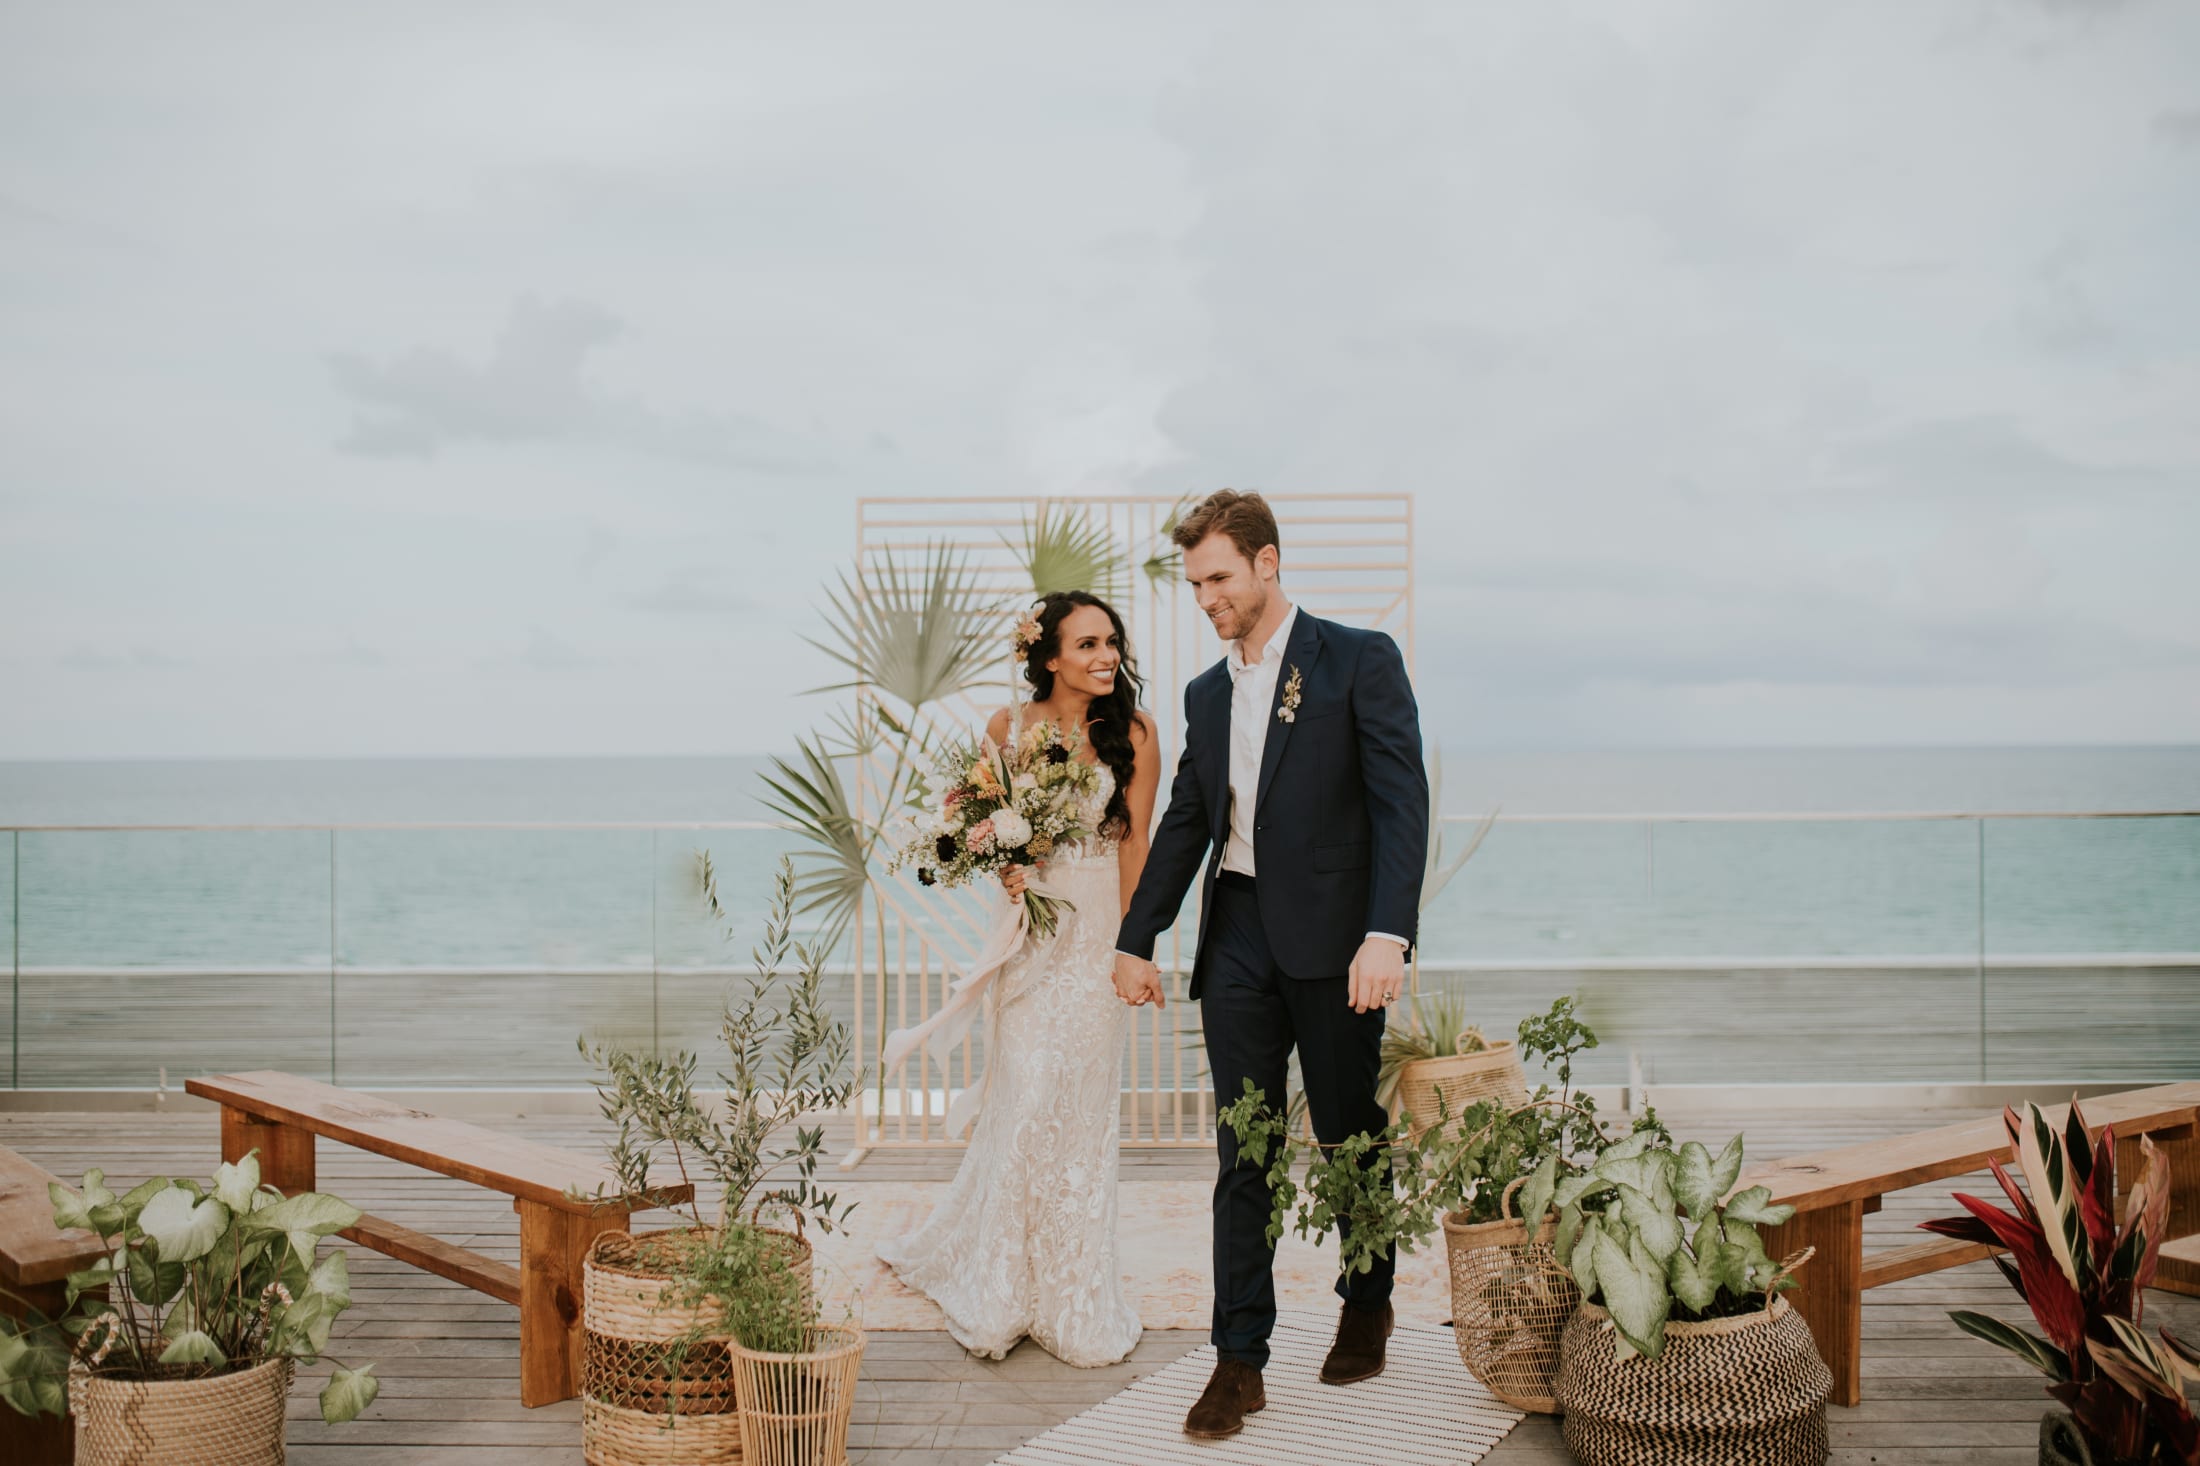 Couple at wedding in front of beach and ocean in background